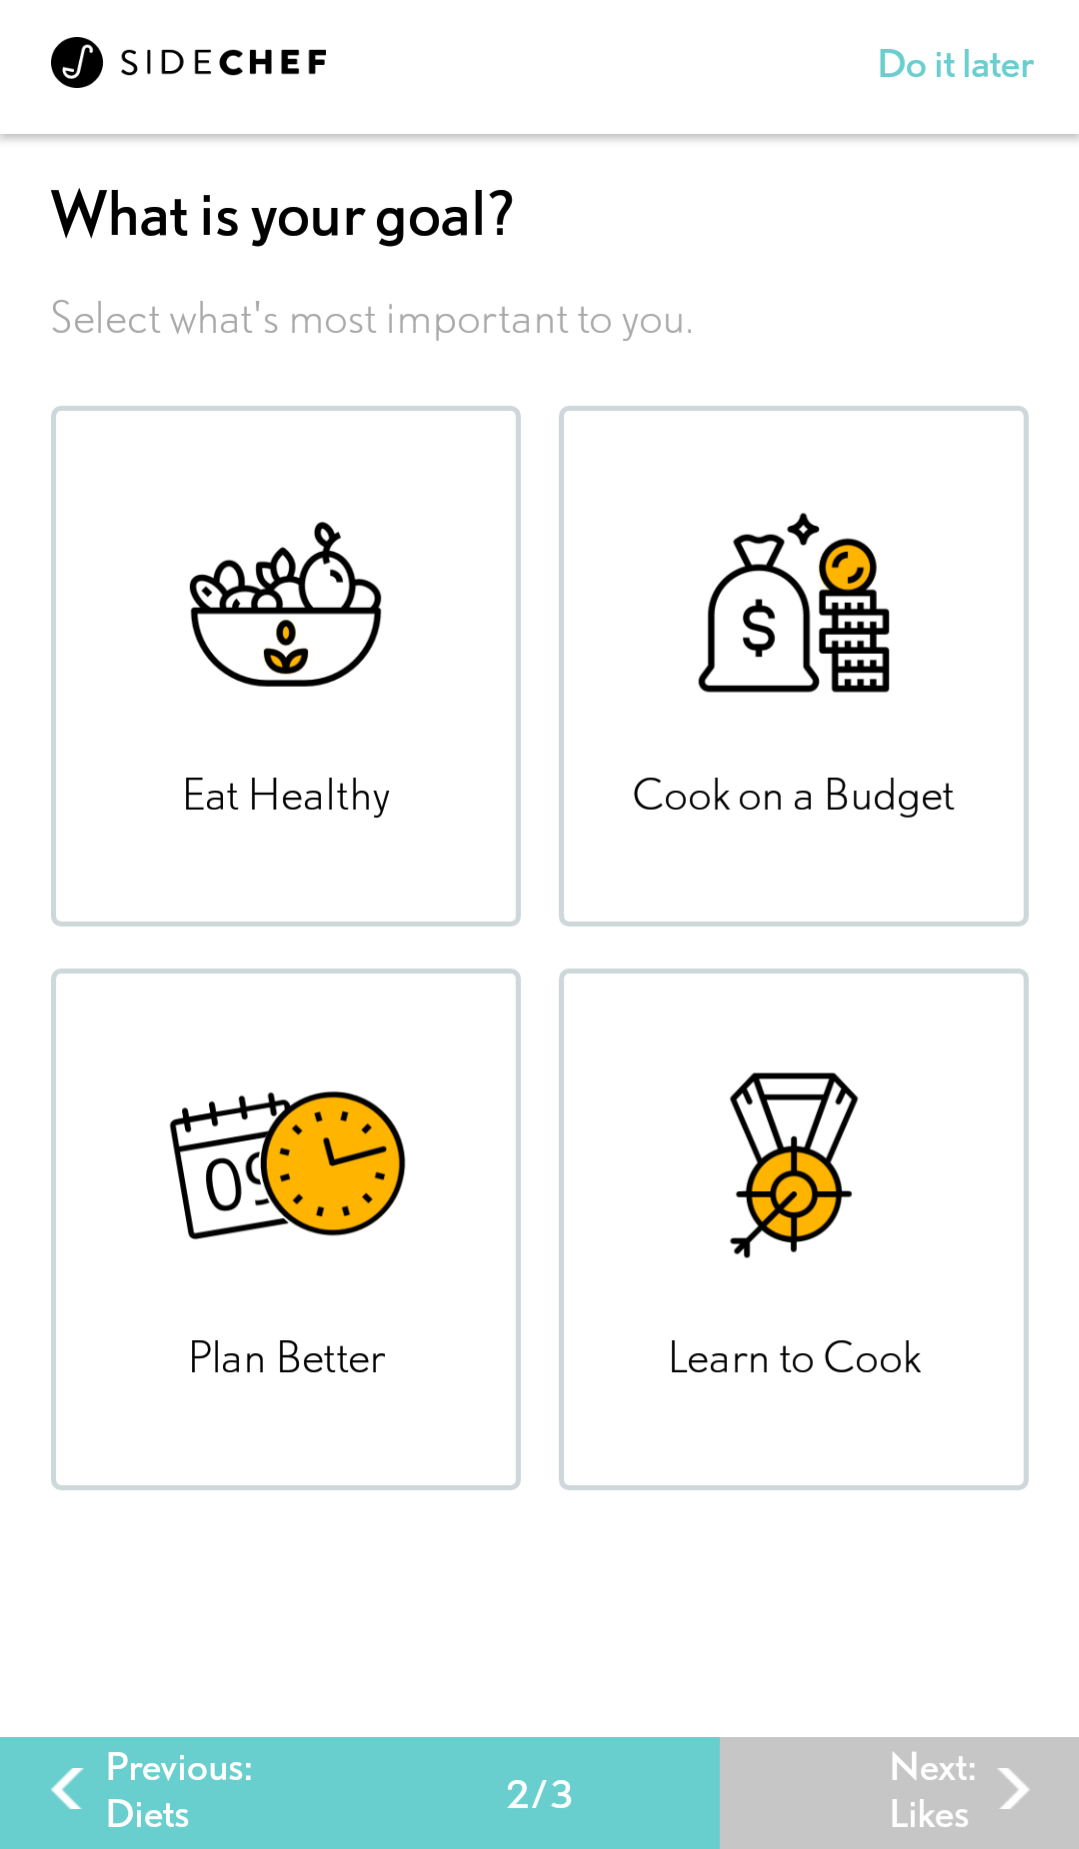 Sidechef lets you choose an objective for meal planning